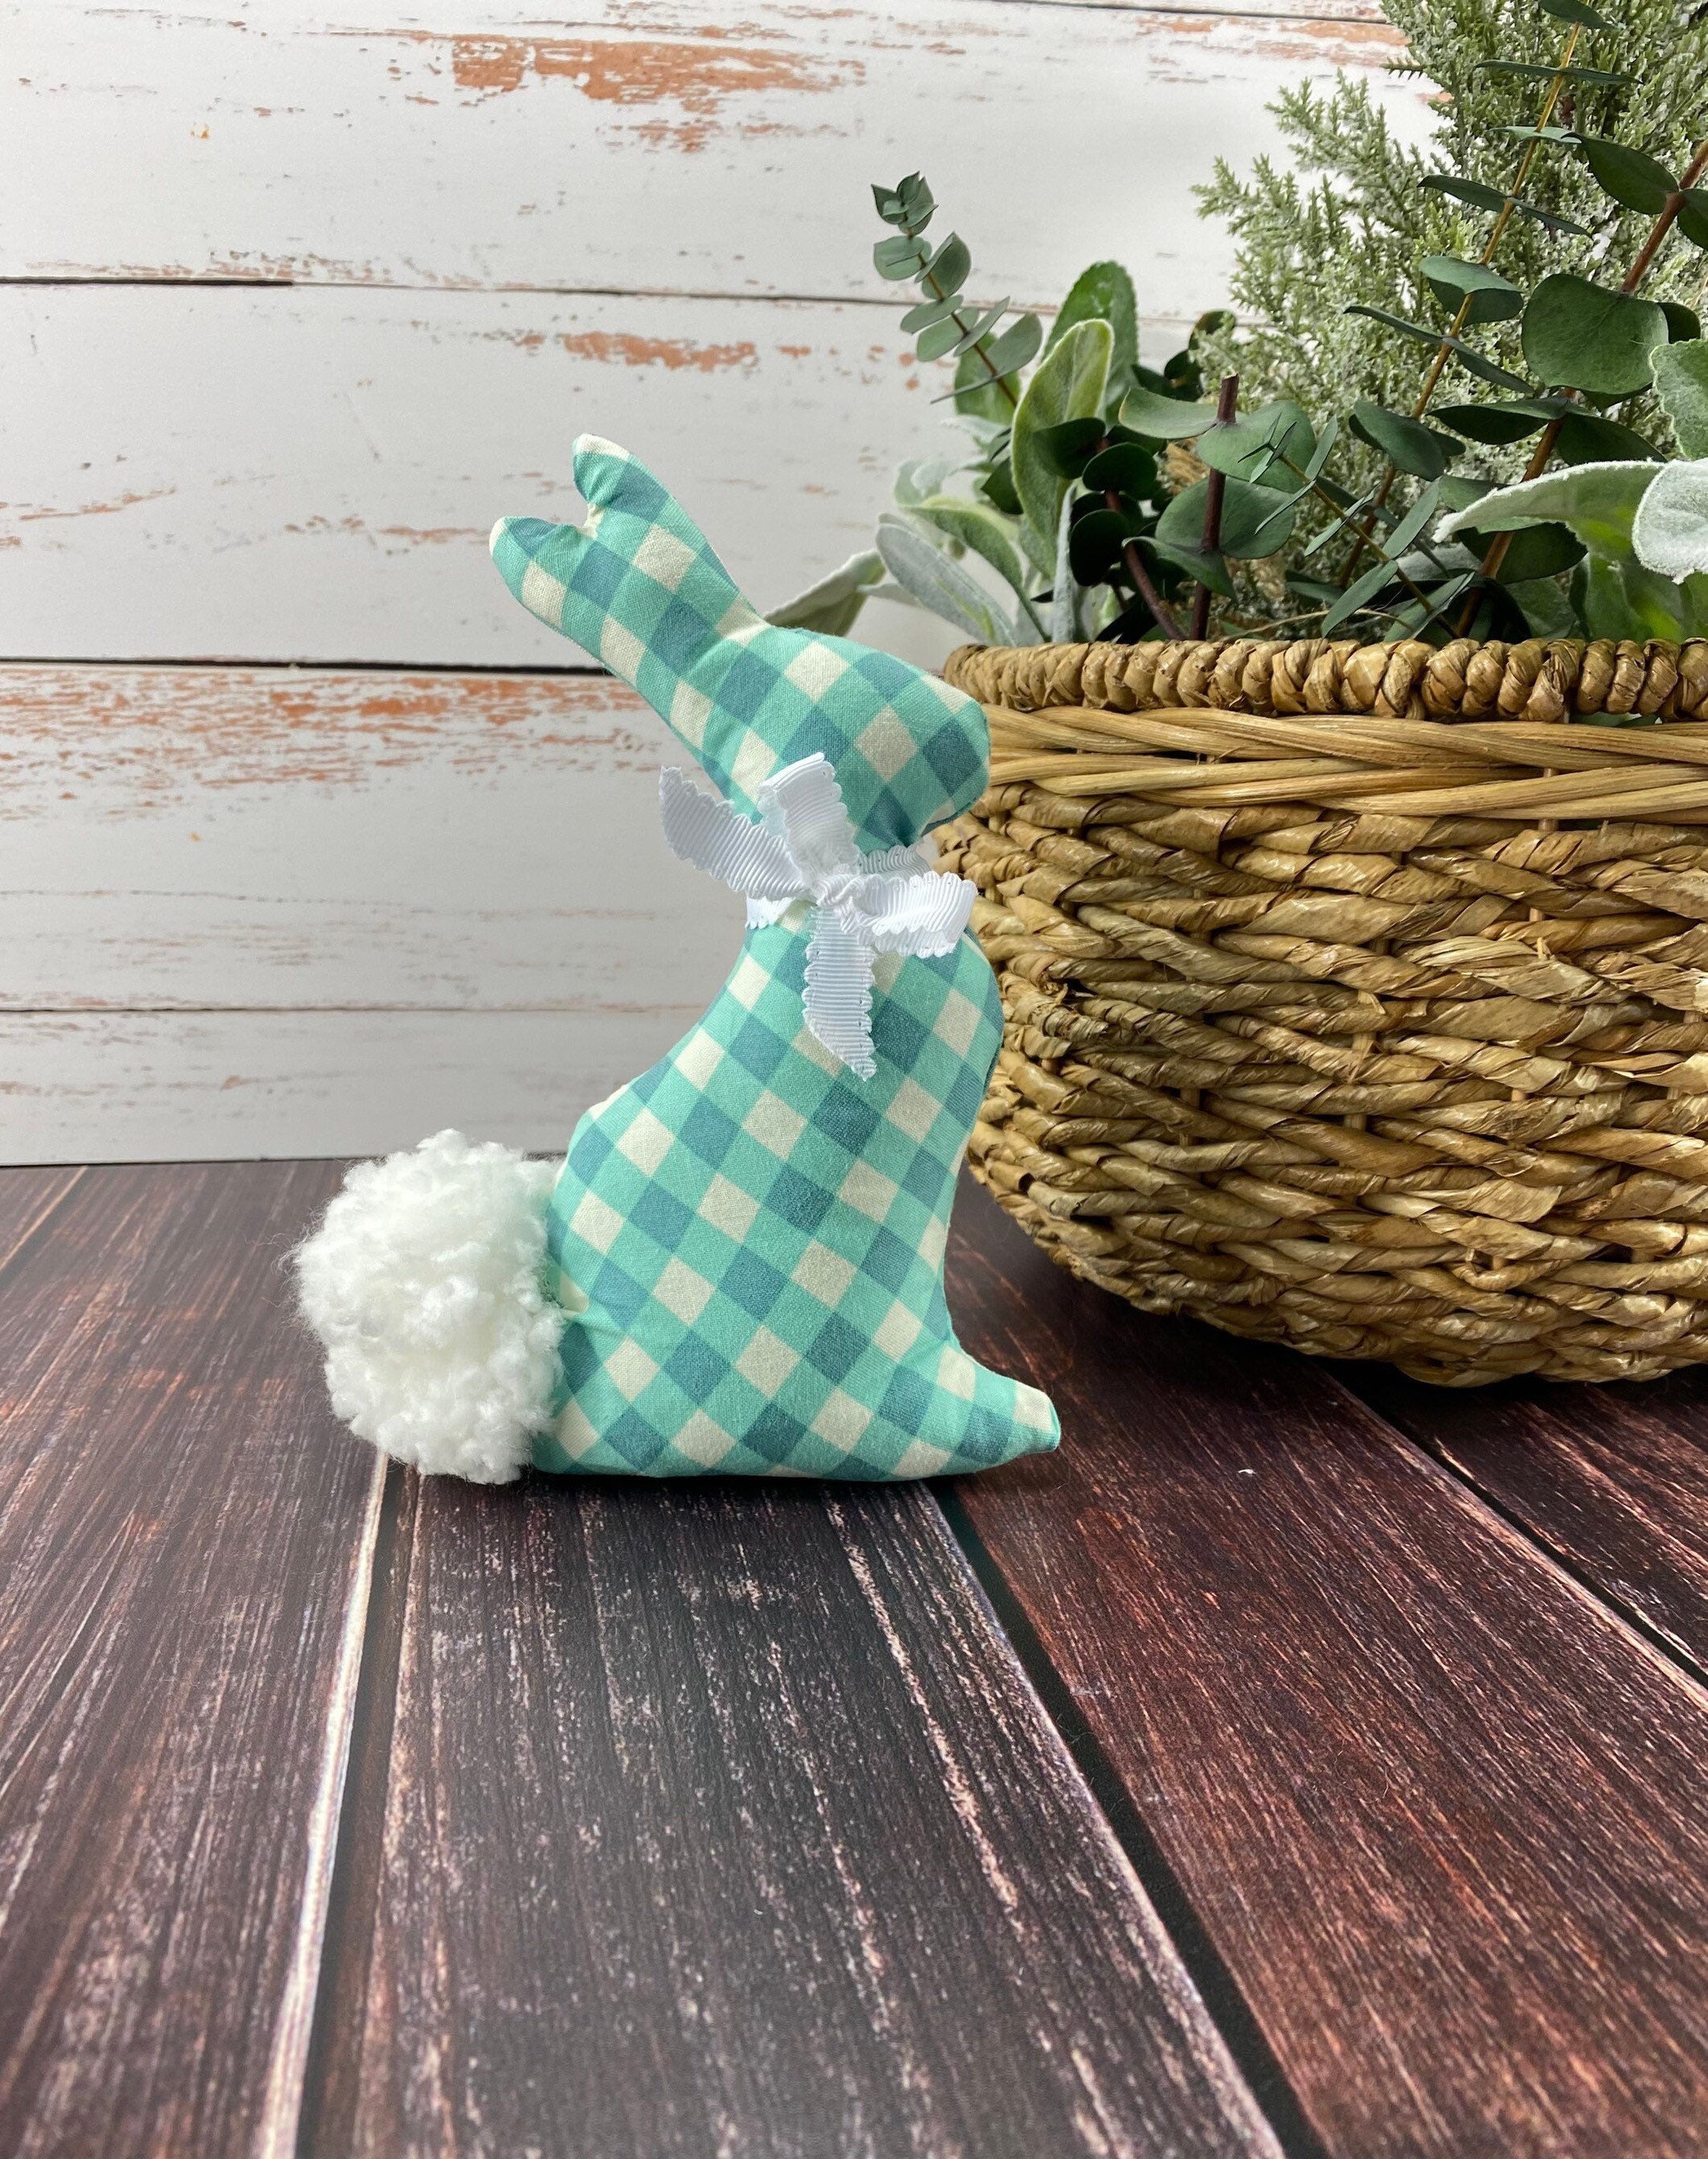 Blue White Fabric Bunny / Plaid Stuffed Easter Rabbit / Tiered | Etsy